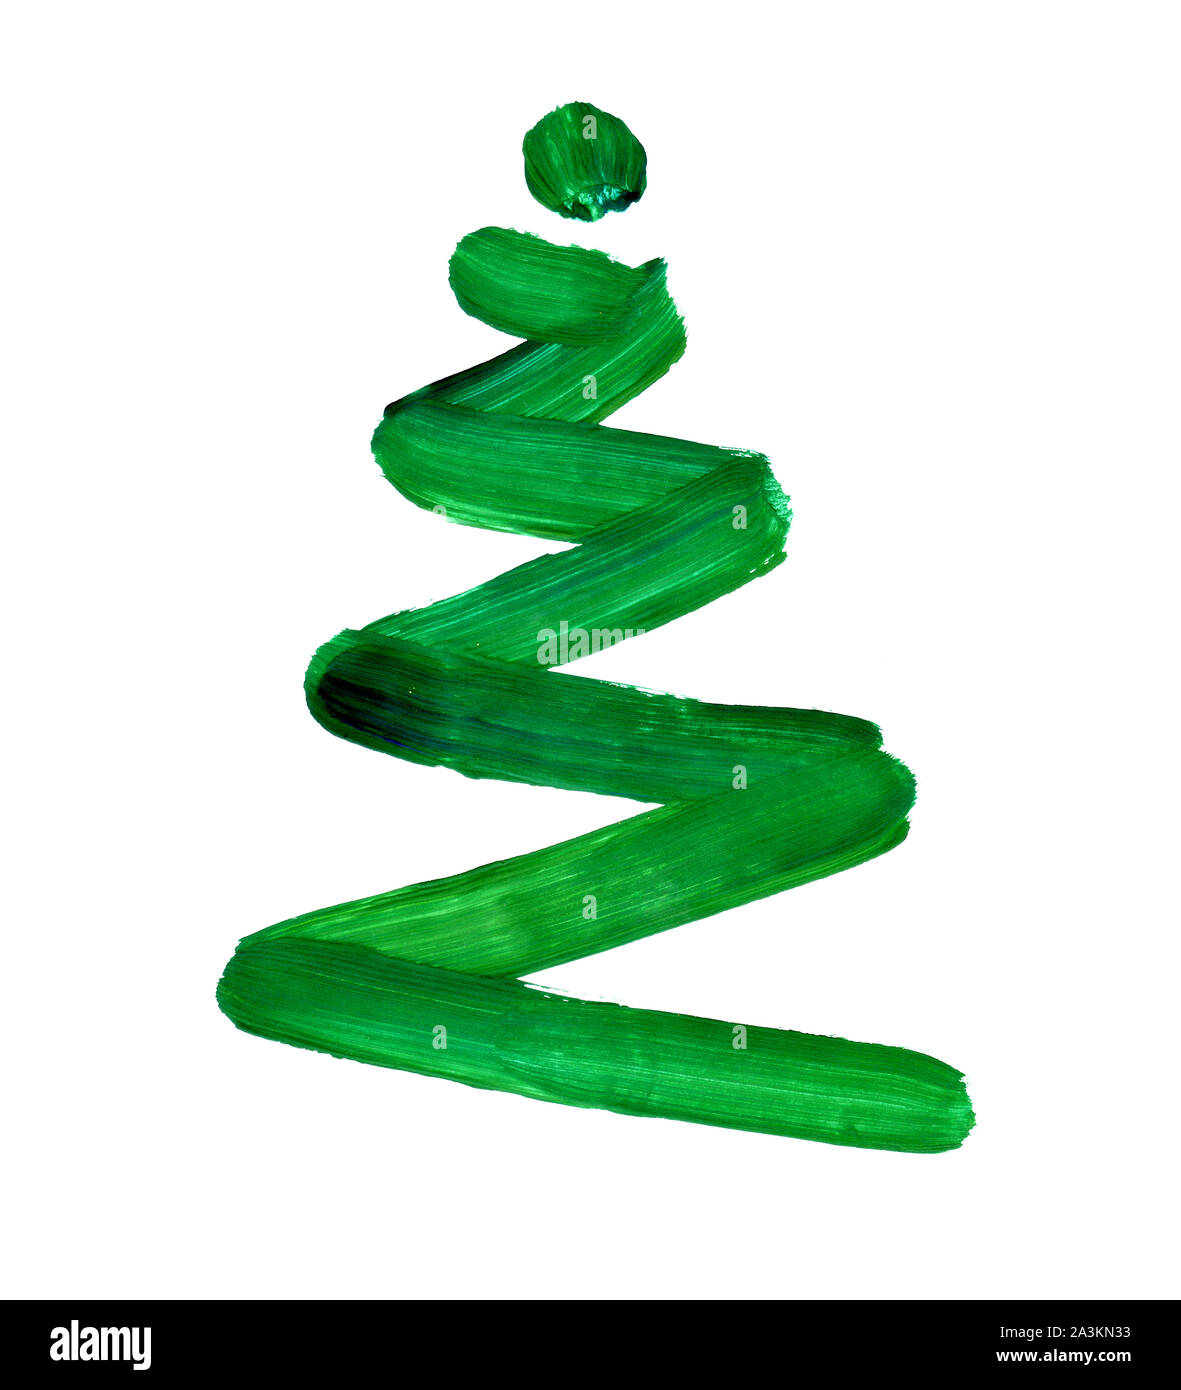 Hand drawing green Christmas tree. Brush paint spot on a white background. Stock Photo